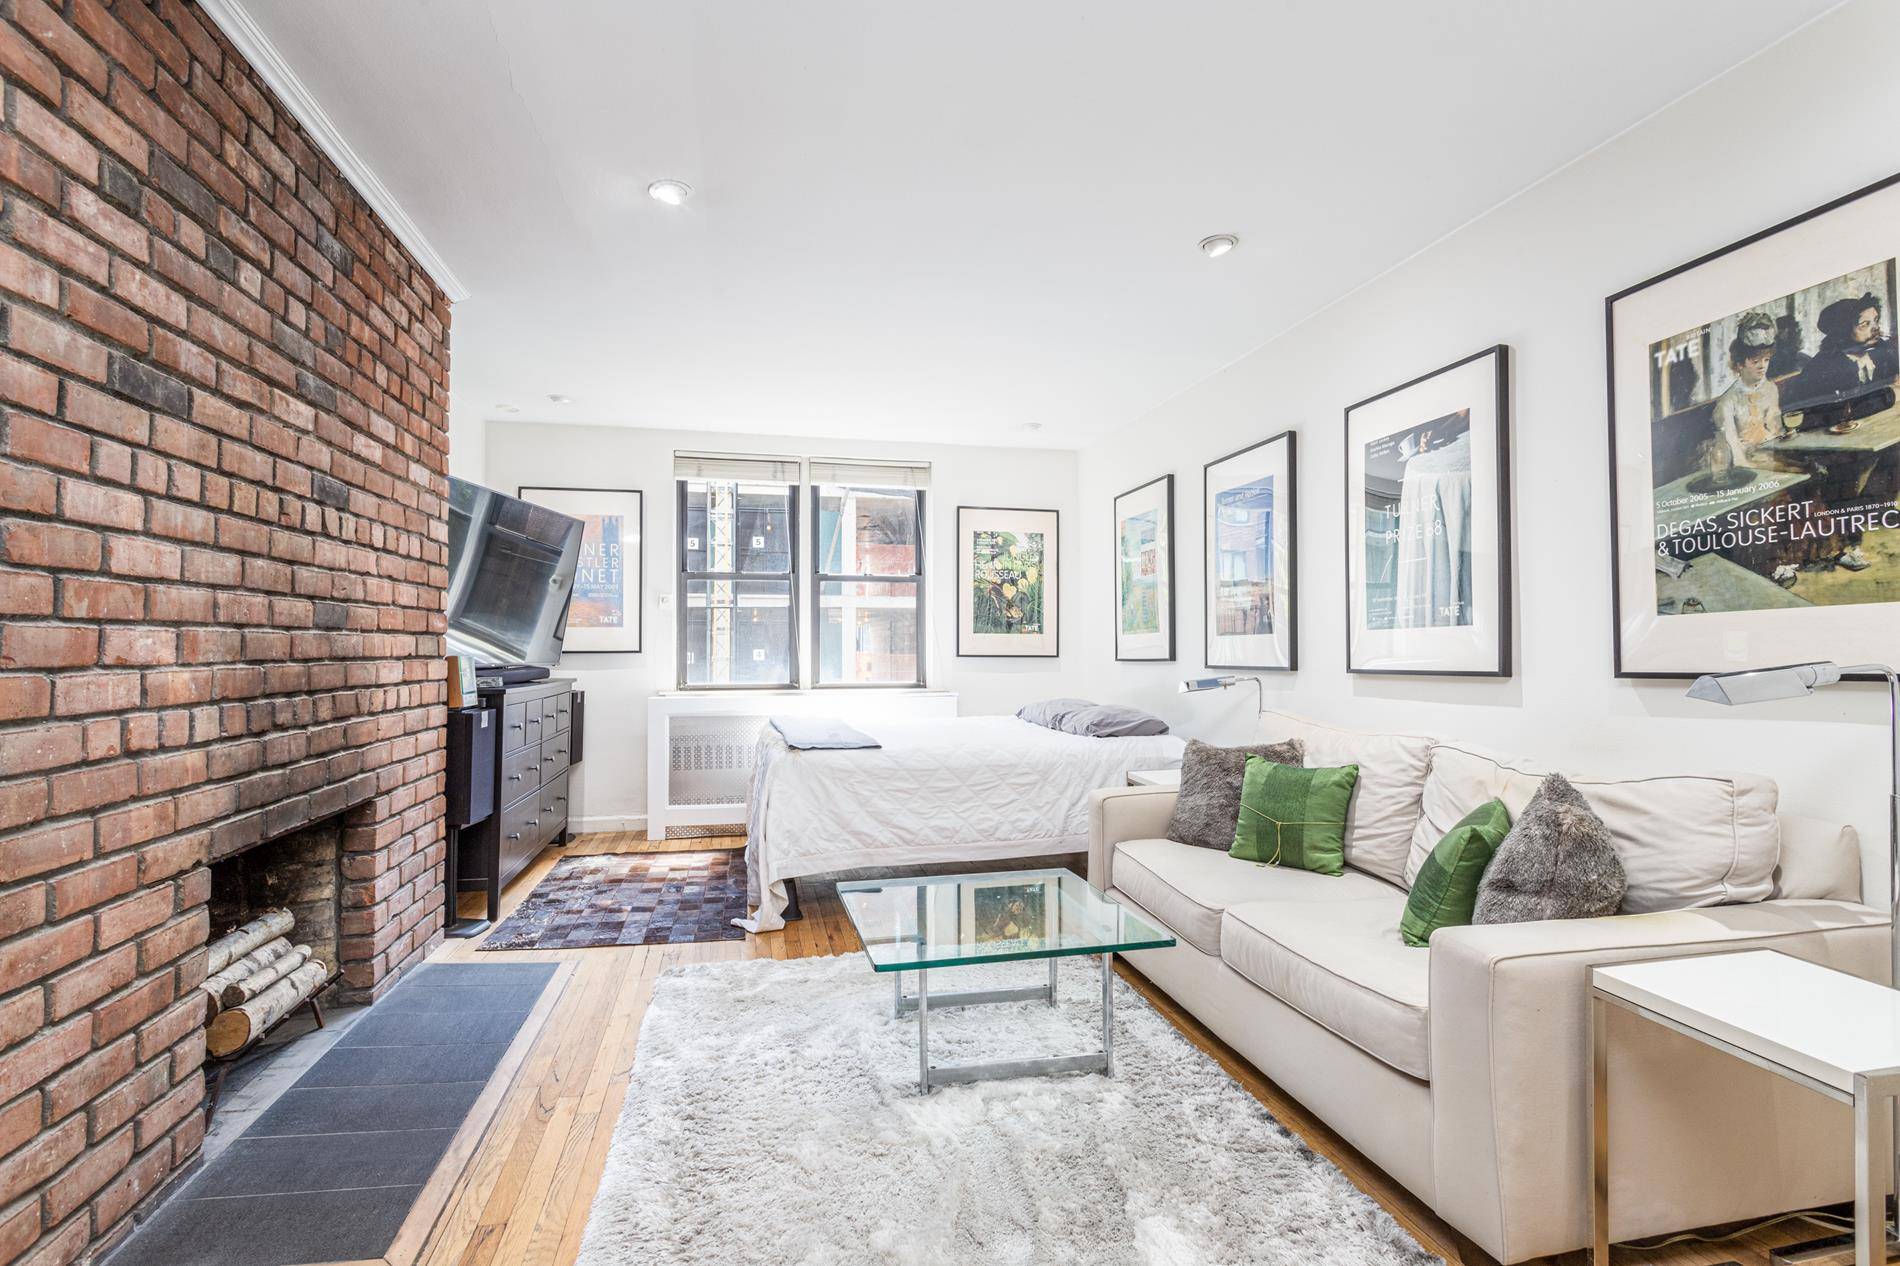 LOW maintenance 769 per month Working fireplace Exposed brick Elevator Building South light and so much more !